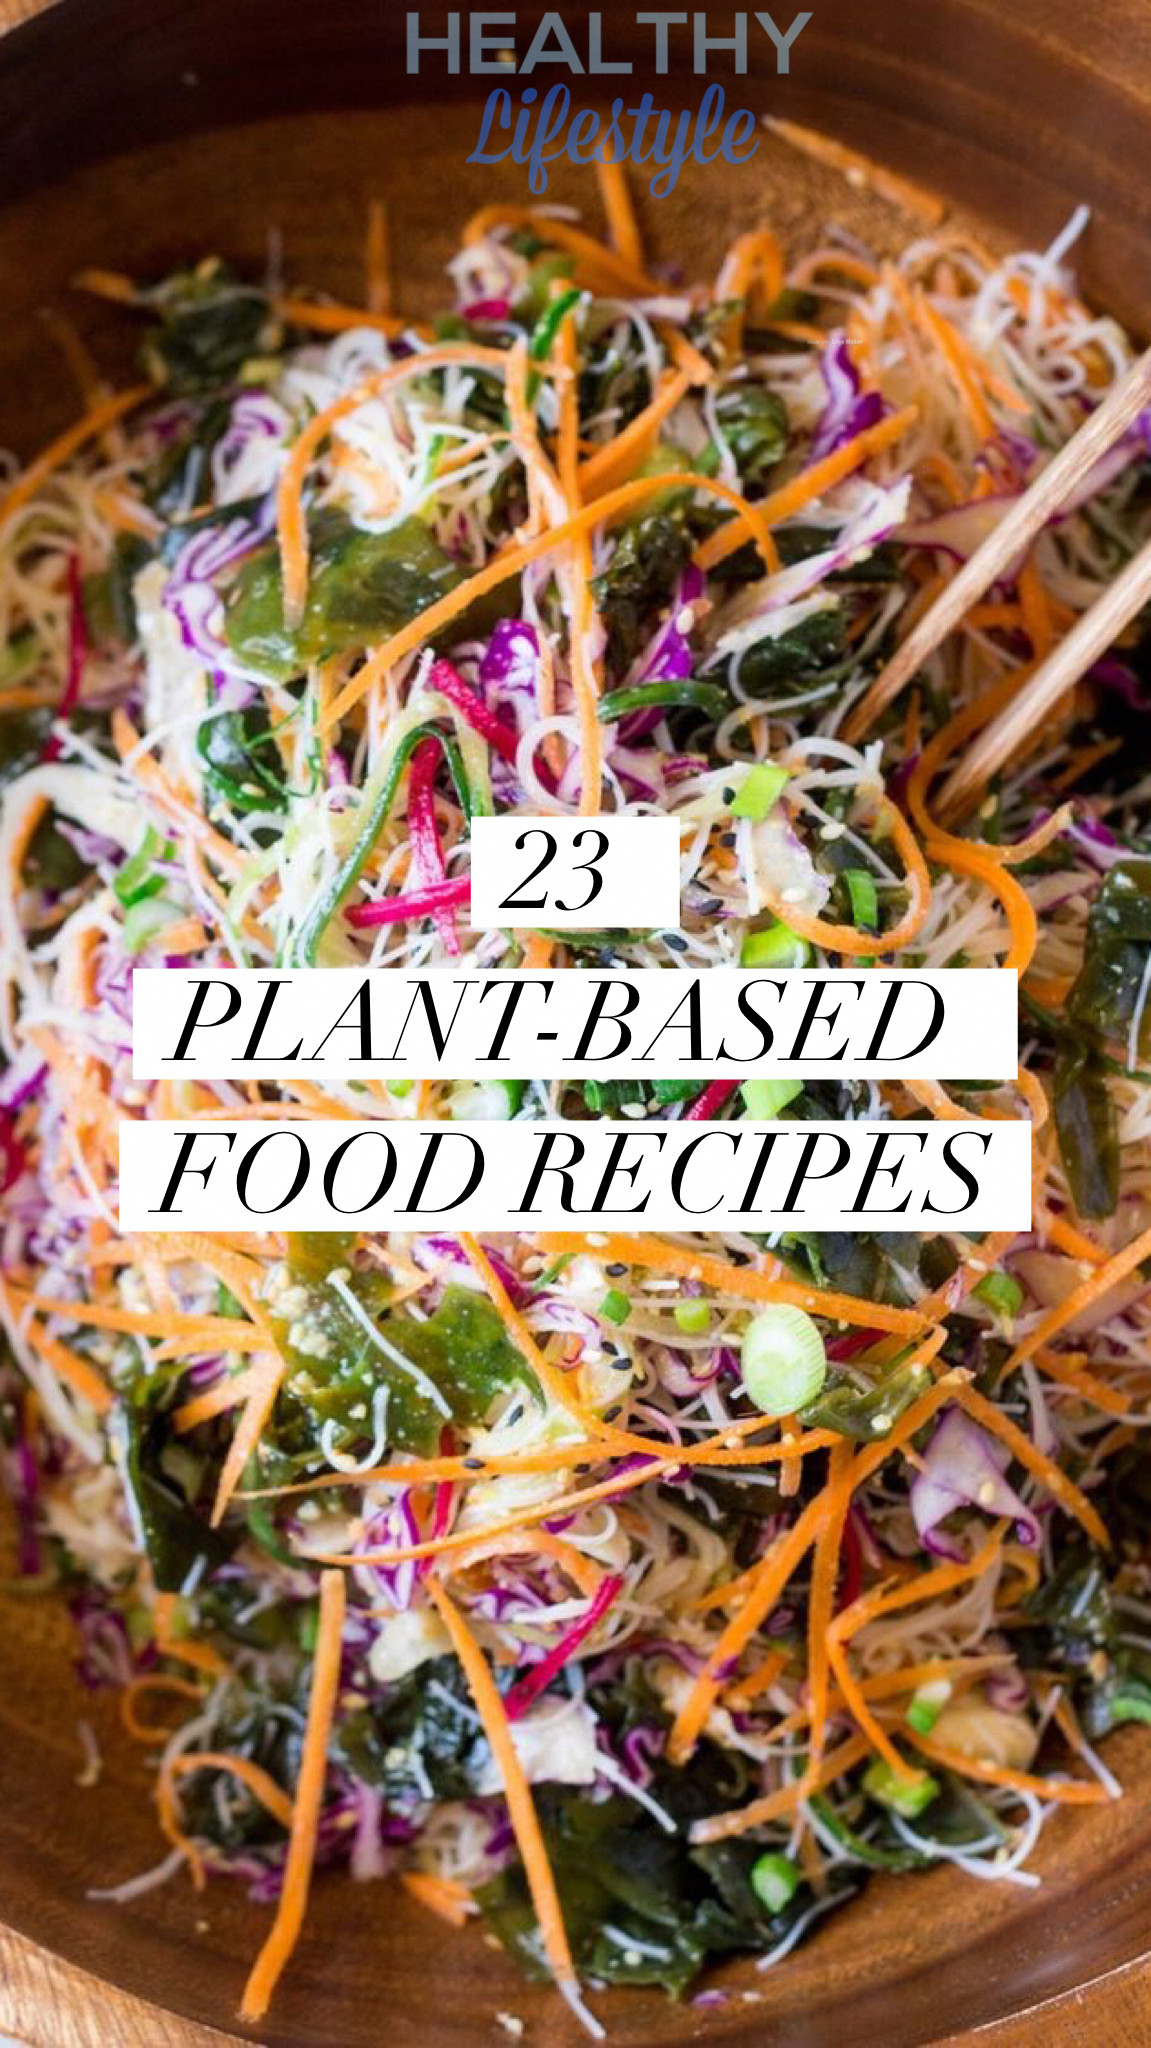 Tasty Plant Based Recipes
 Here are our 23 tasty Plant Based Dinner Recipes to add to